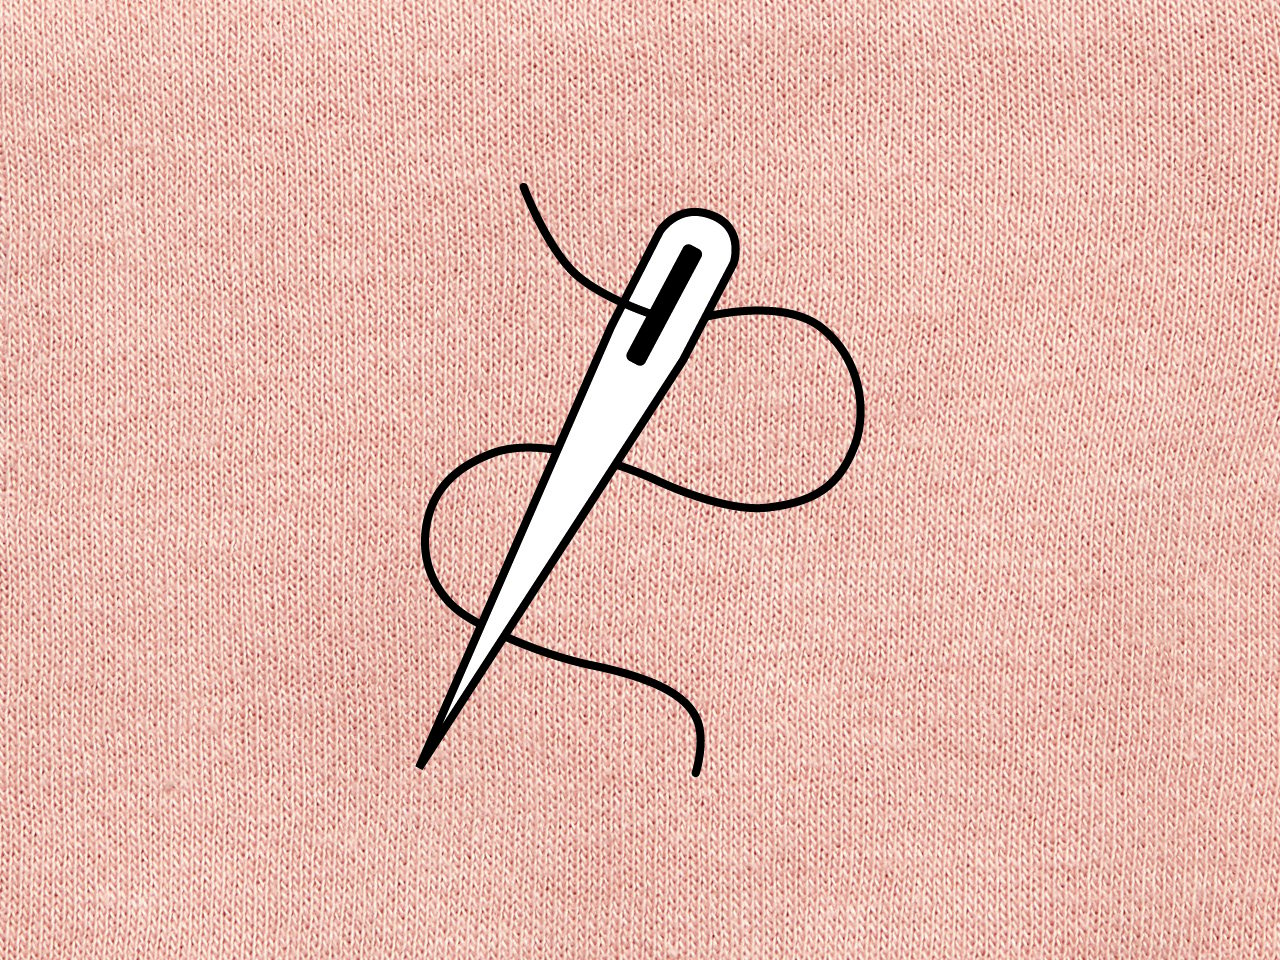 Illustration of needles and threads on a pink cloth background